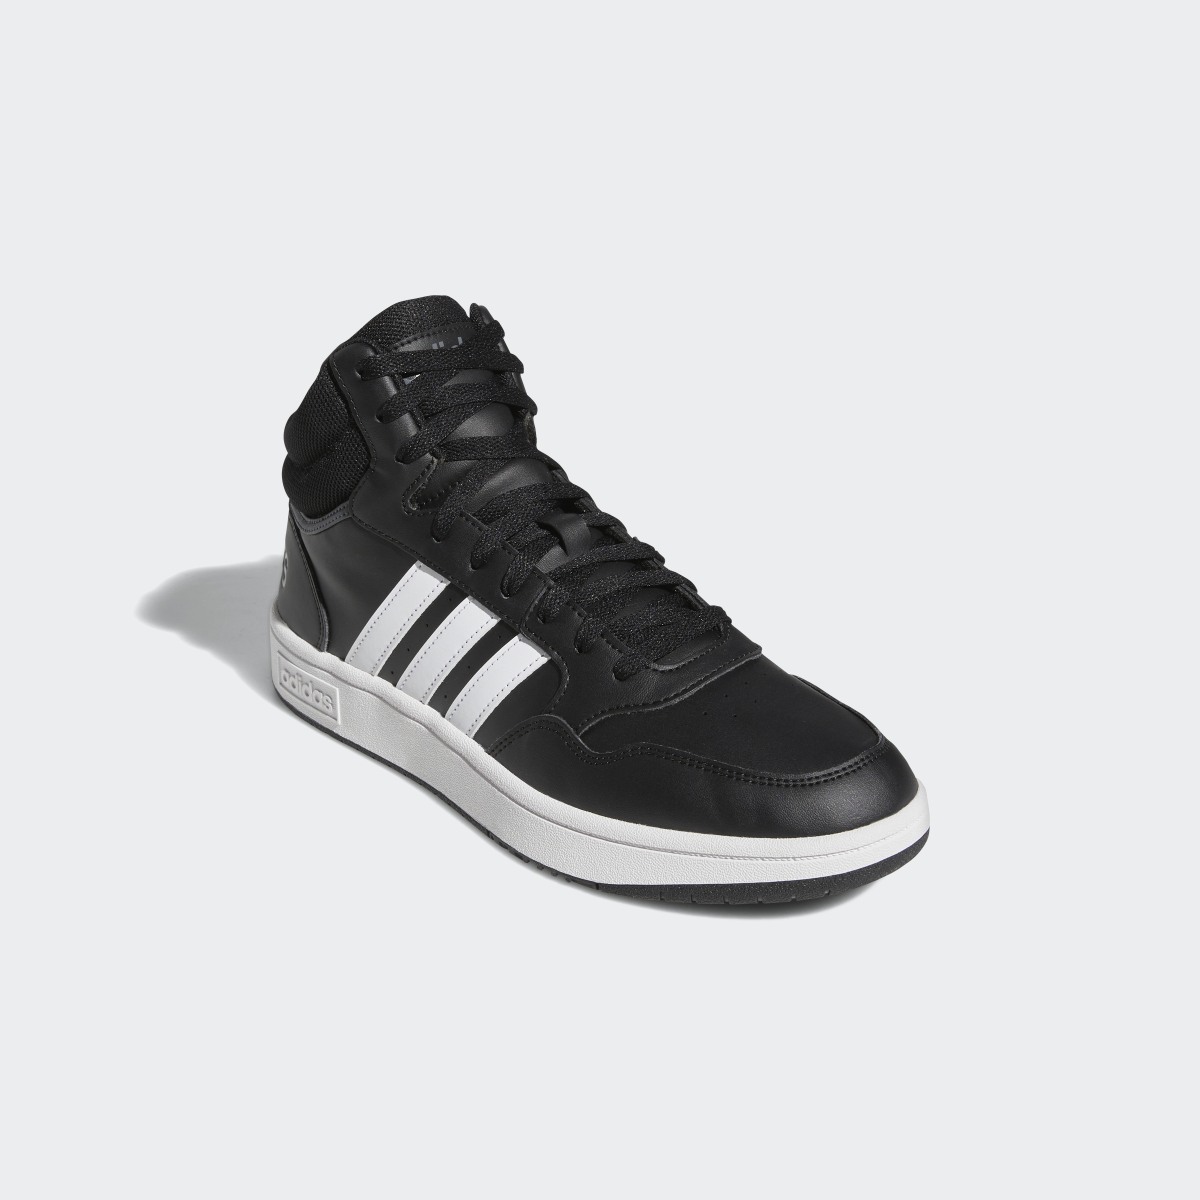 Adidas Hoops 3.0 Mid Classic Vintage Shoes. 5